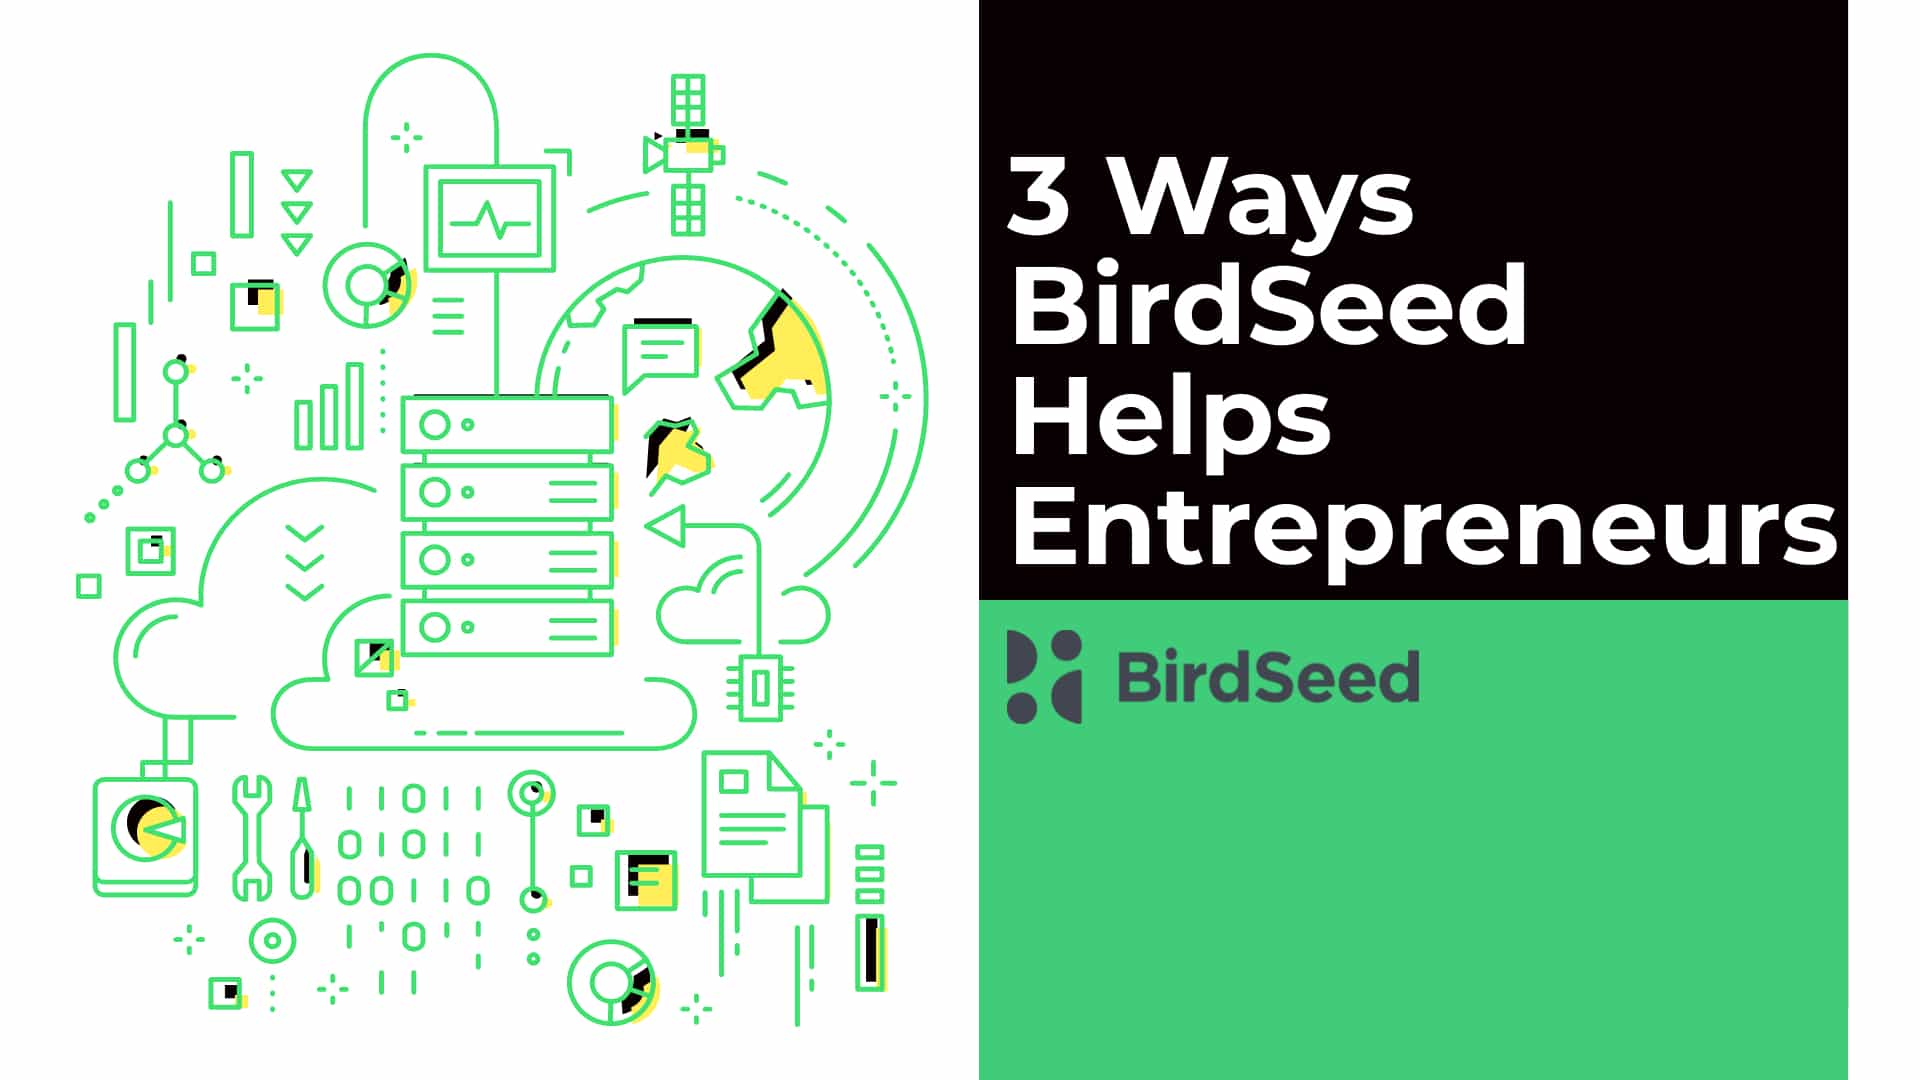 Connecting with your audience should be simple. BirdSeed is designed to be easy to use while helping you connect to your audience.